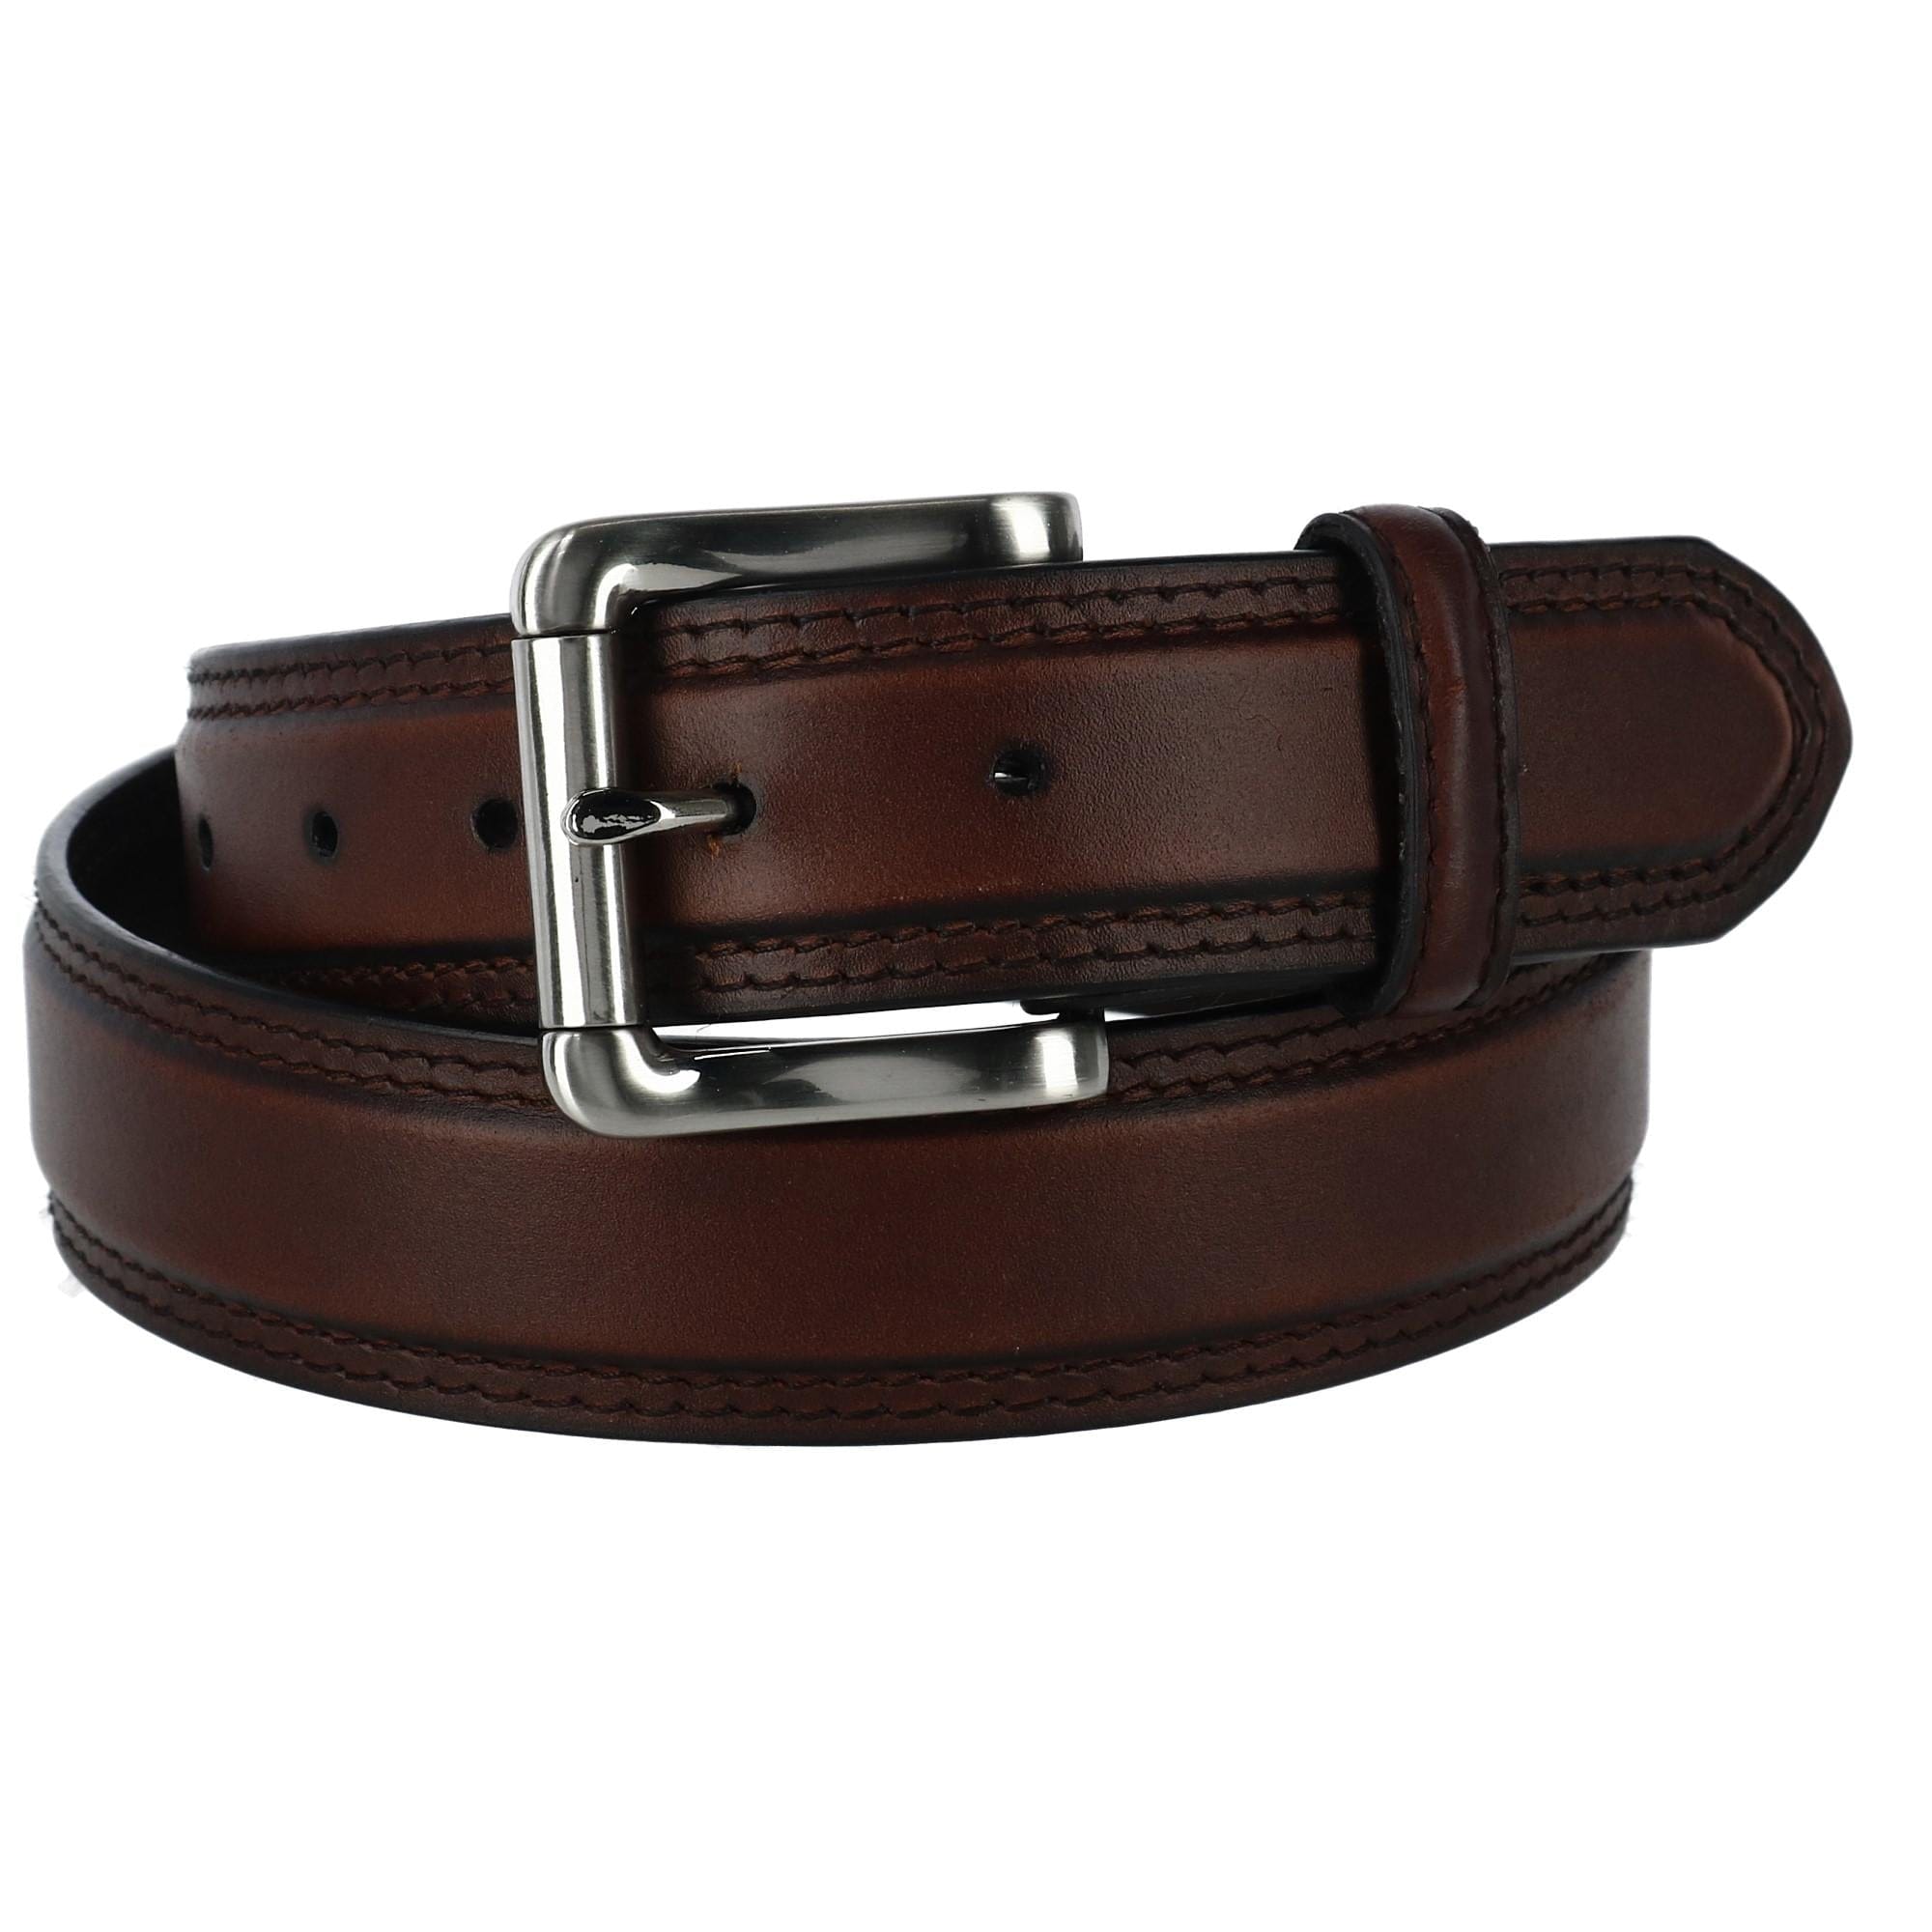 Men's Oil Tanned Padded Belt with Roller Buckle by Hickory Creek ...